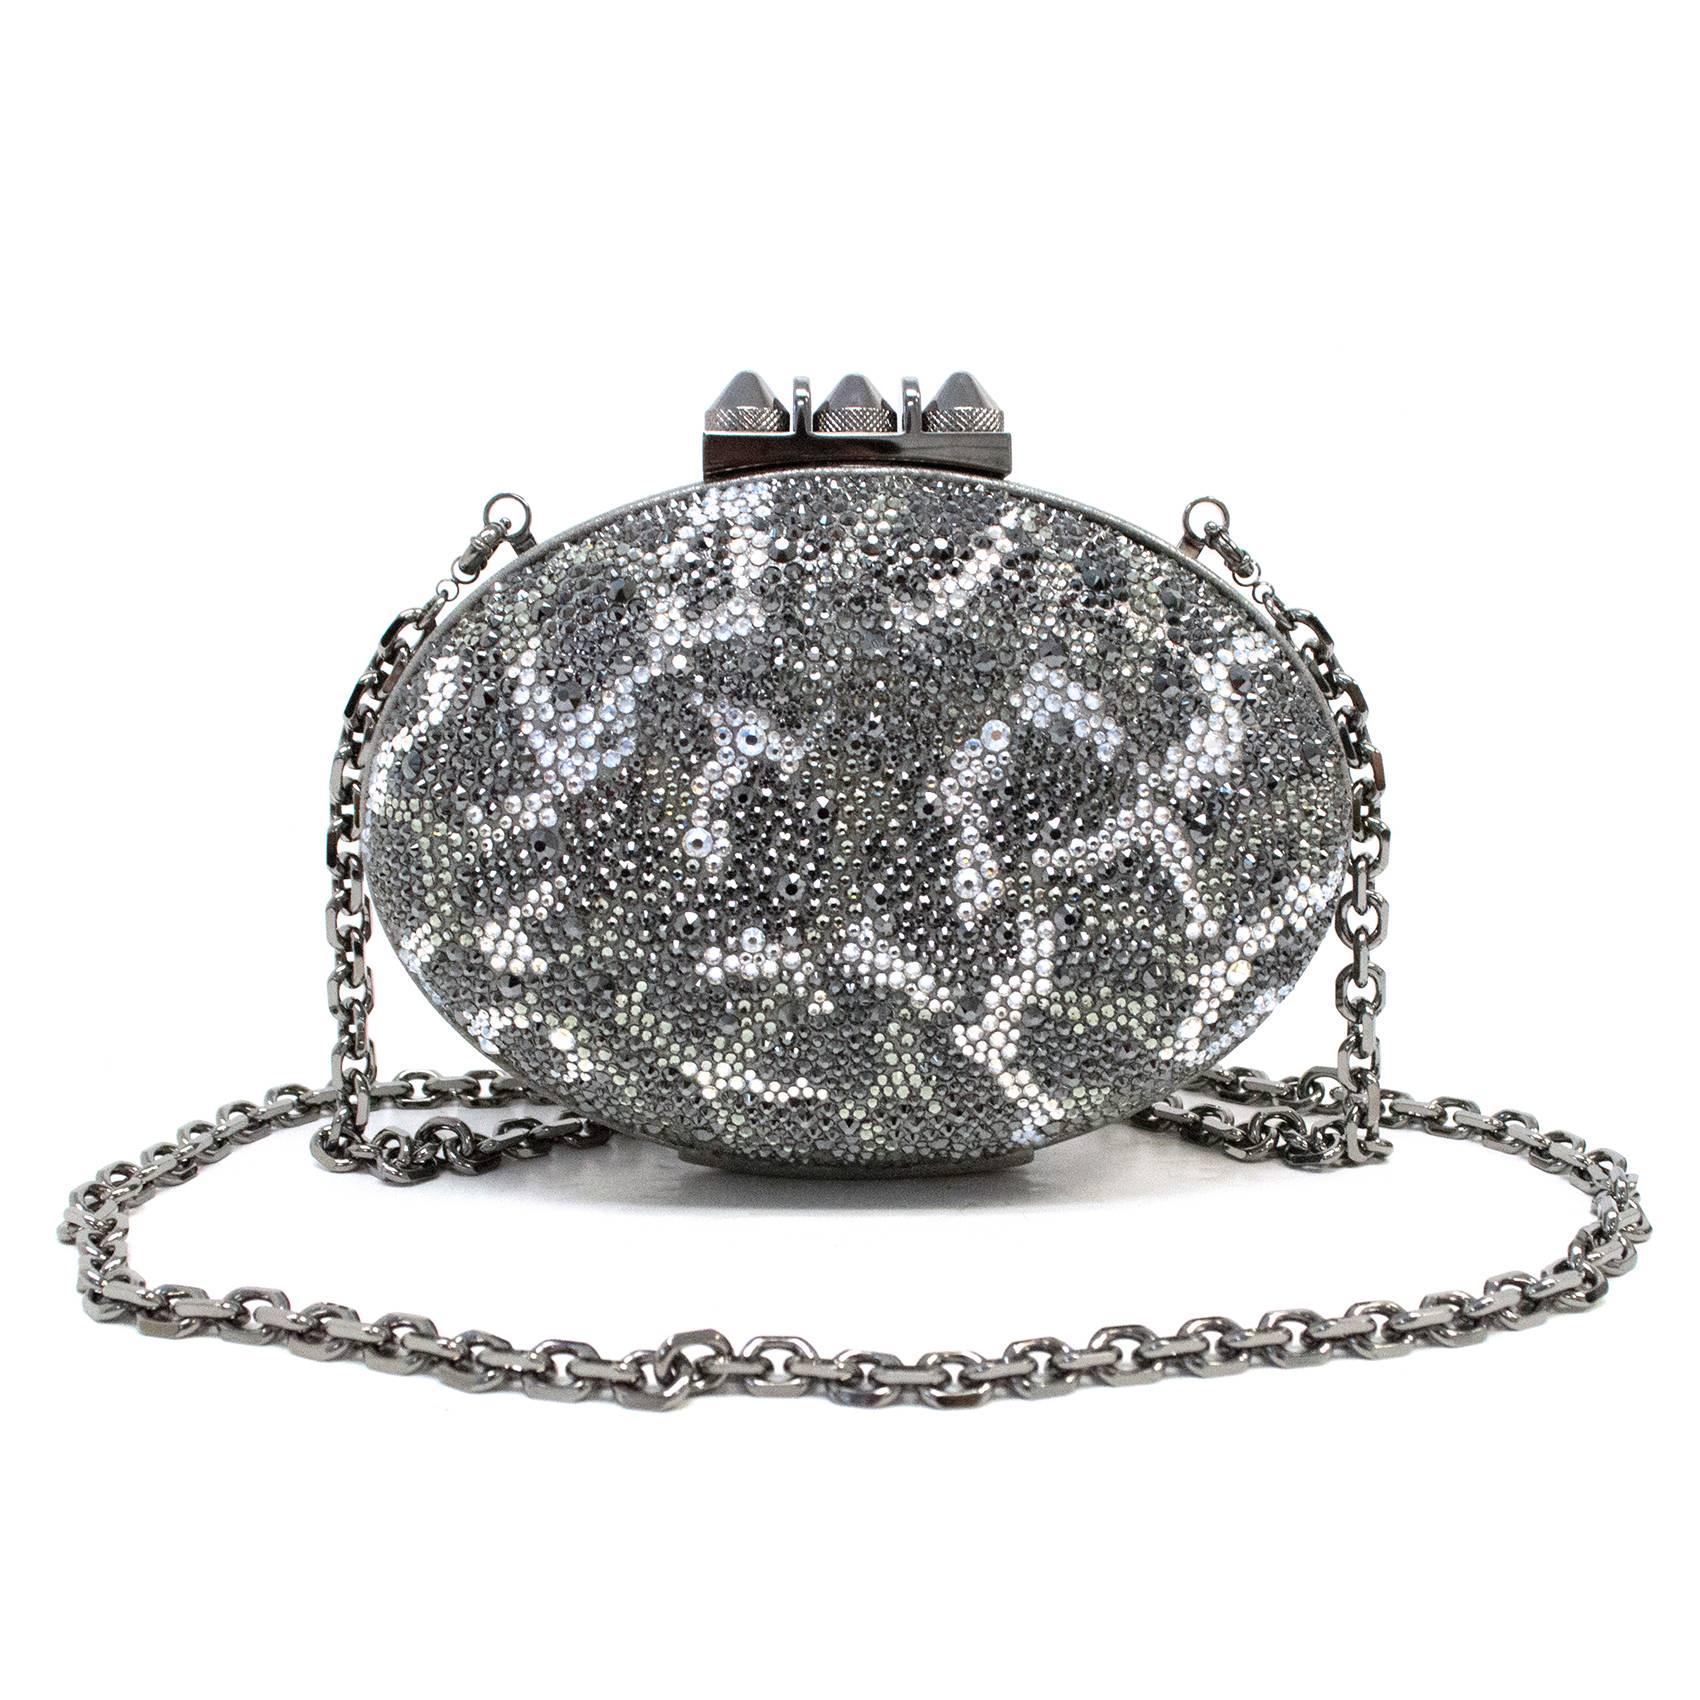 Christian Louboutin Mina Clutch Strass Leopard/Suede Burma from the current season collection. It is designed in a leopard print pattern with grey swarovski crystals, silver studded buckle and detachable silver chain strap handle. This is a very